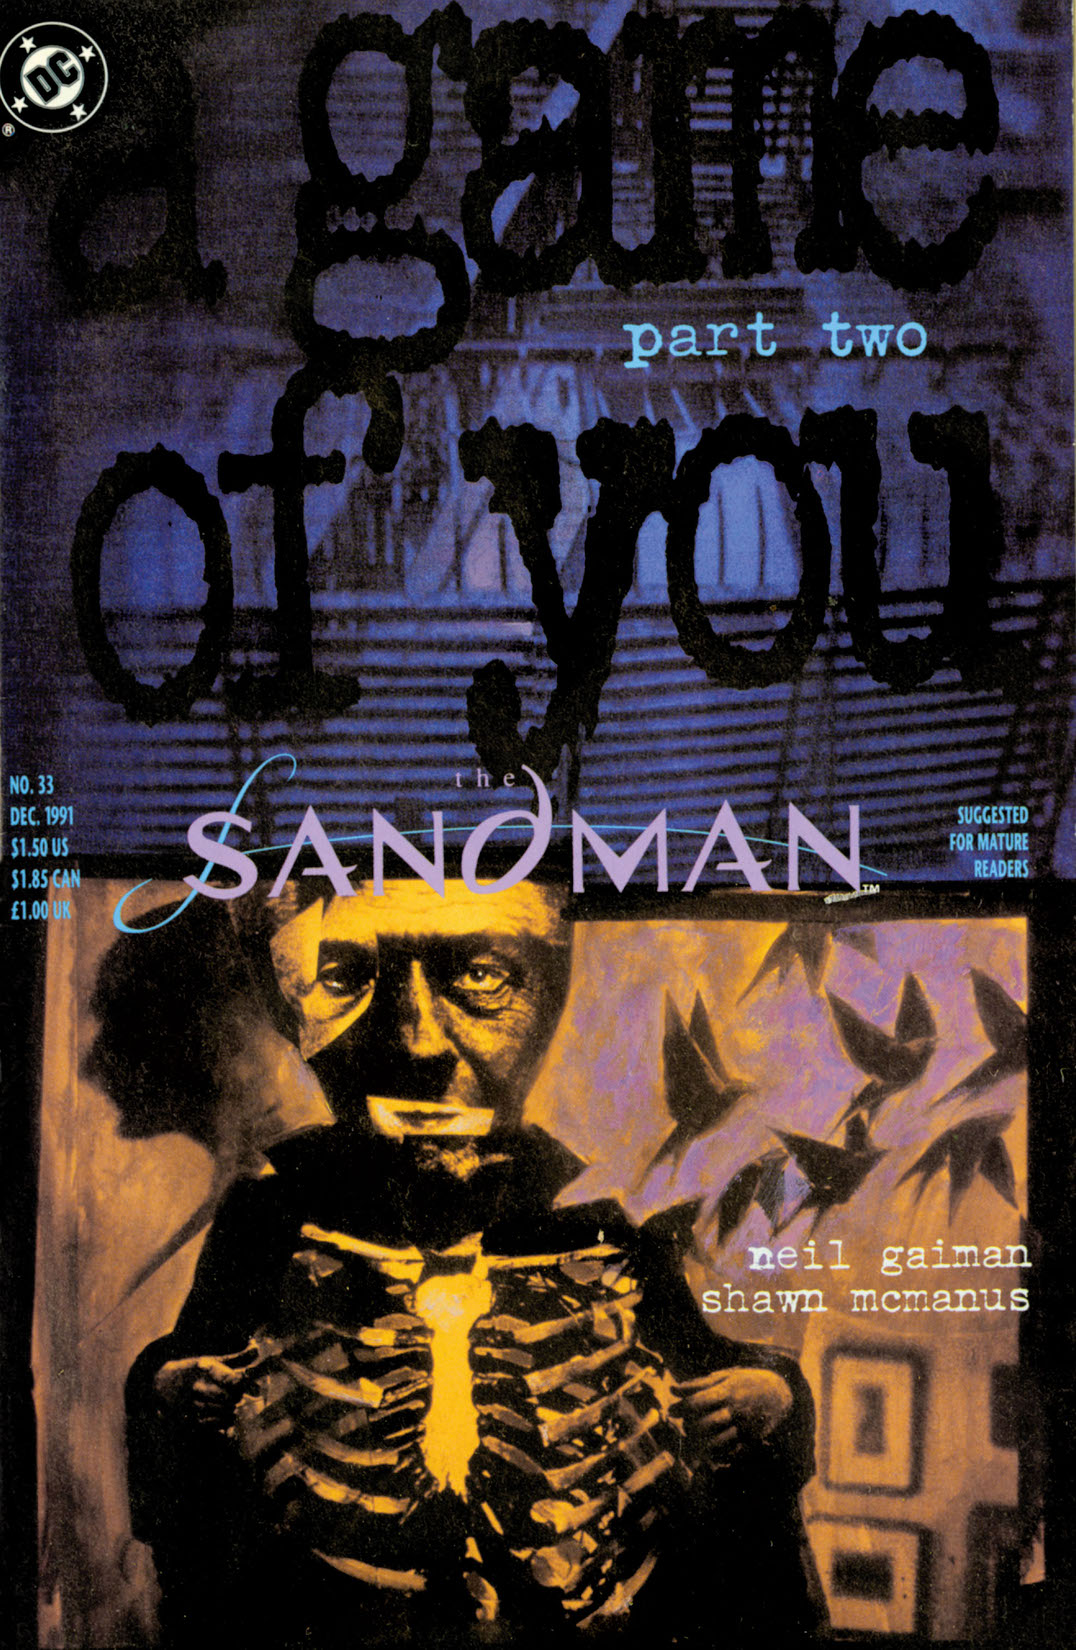 The Sandman #33 preview images